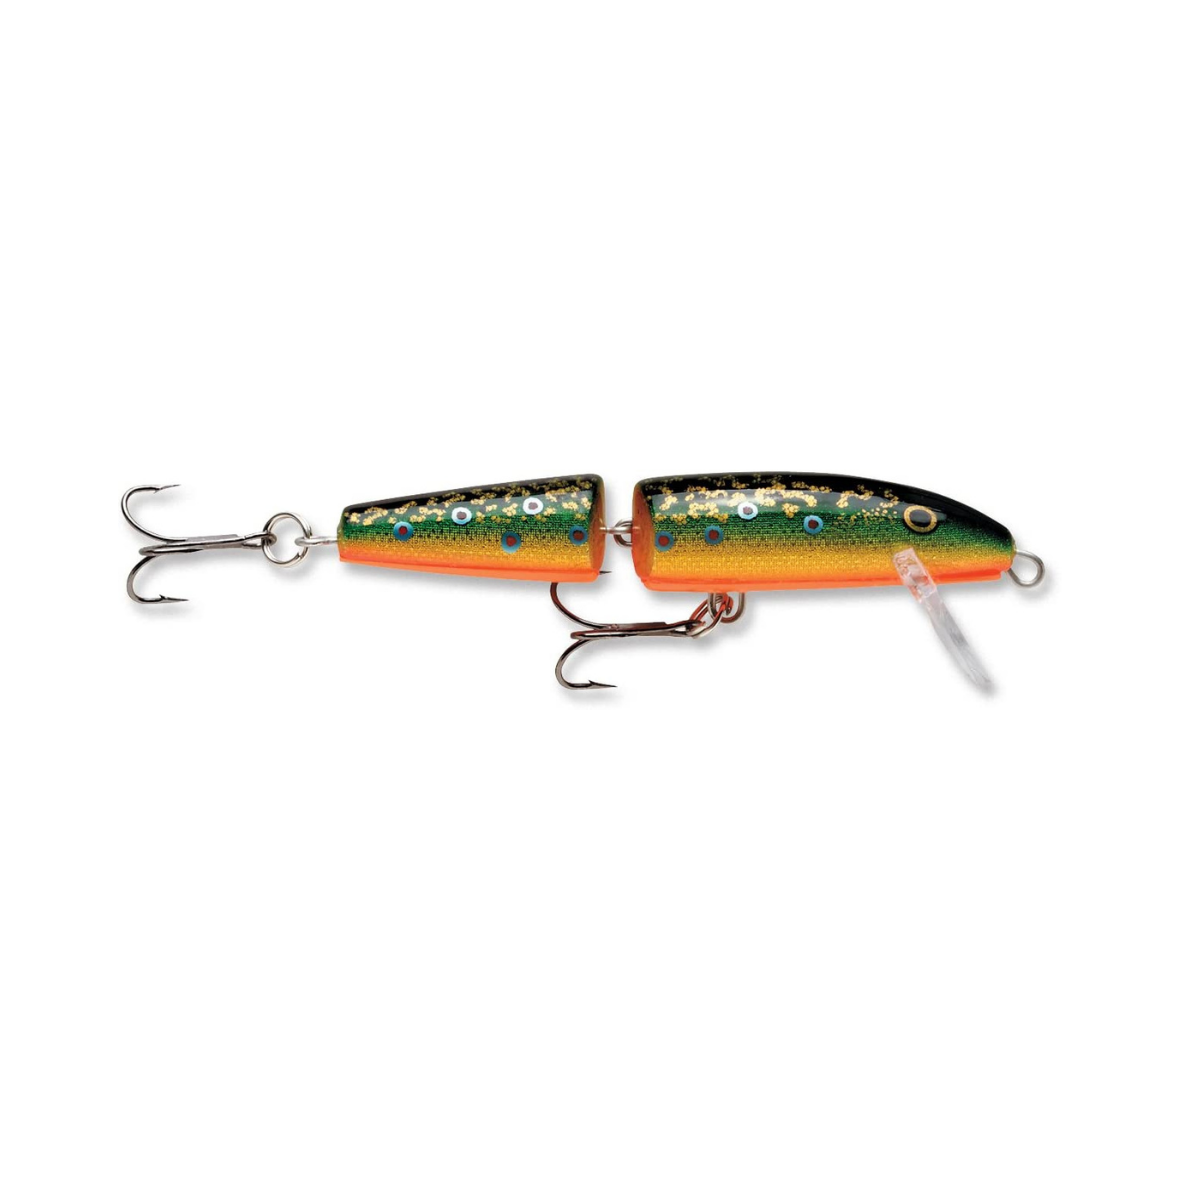 Rapala Original Jointed Minnow Brook Trout 7